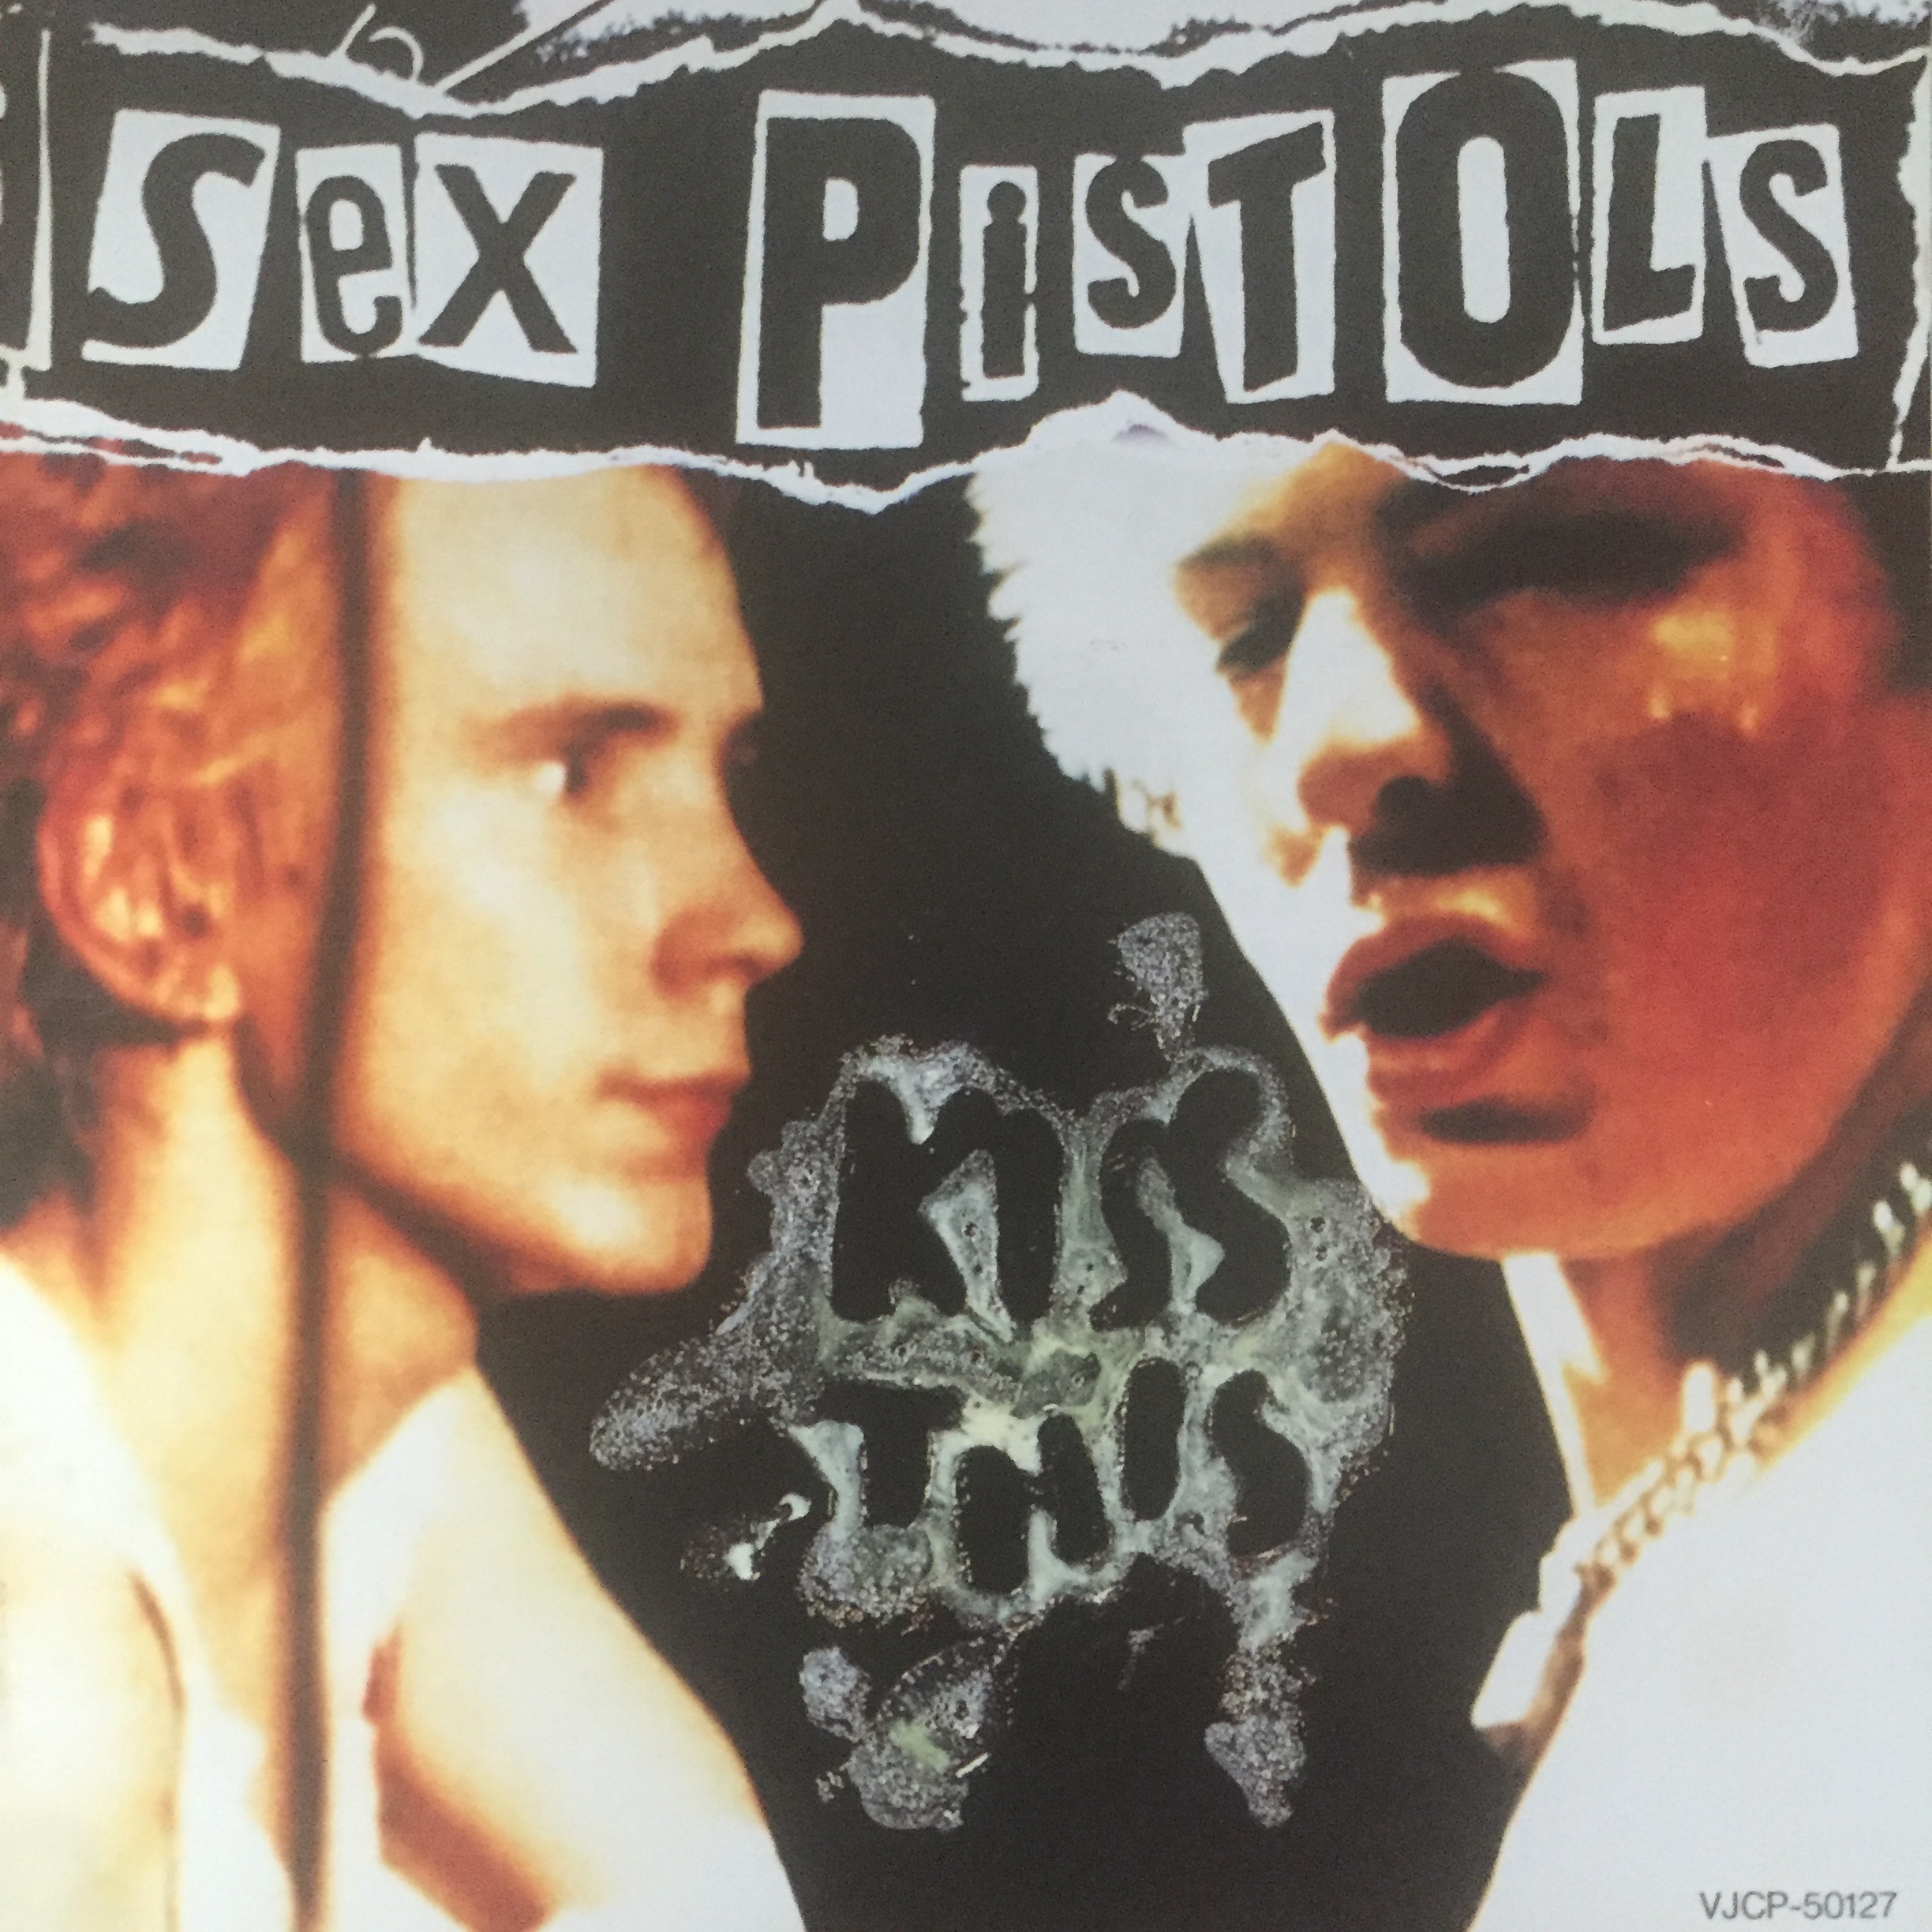 SEX PISTOLS「ANARCHY IN THE UK」「 GOD SAVE THE QUEEN